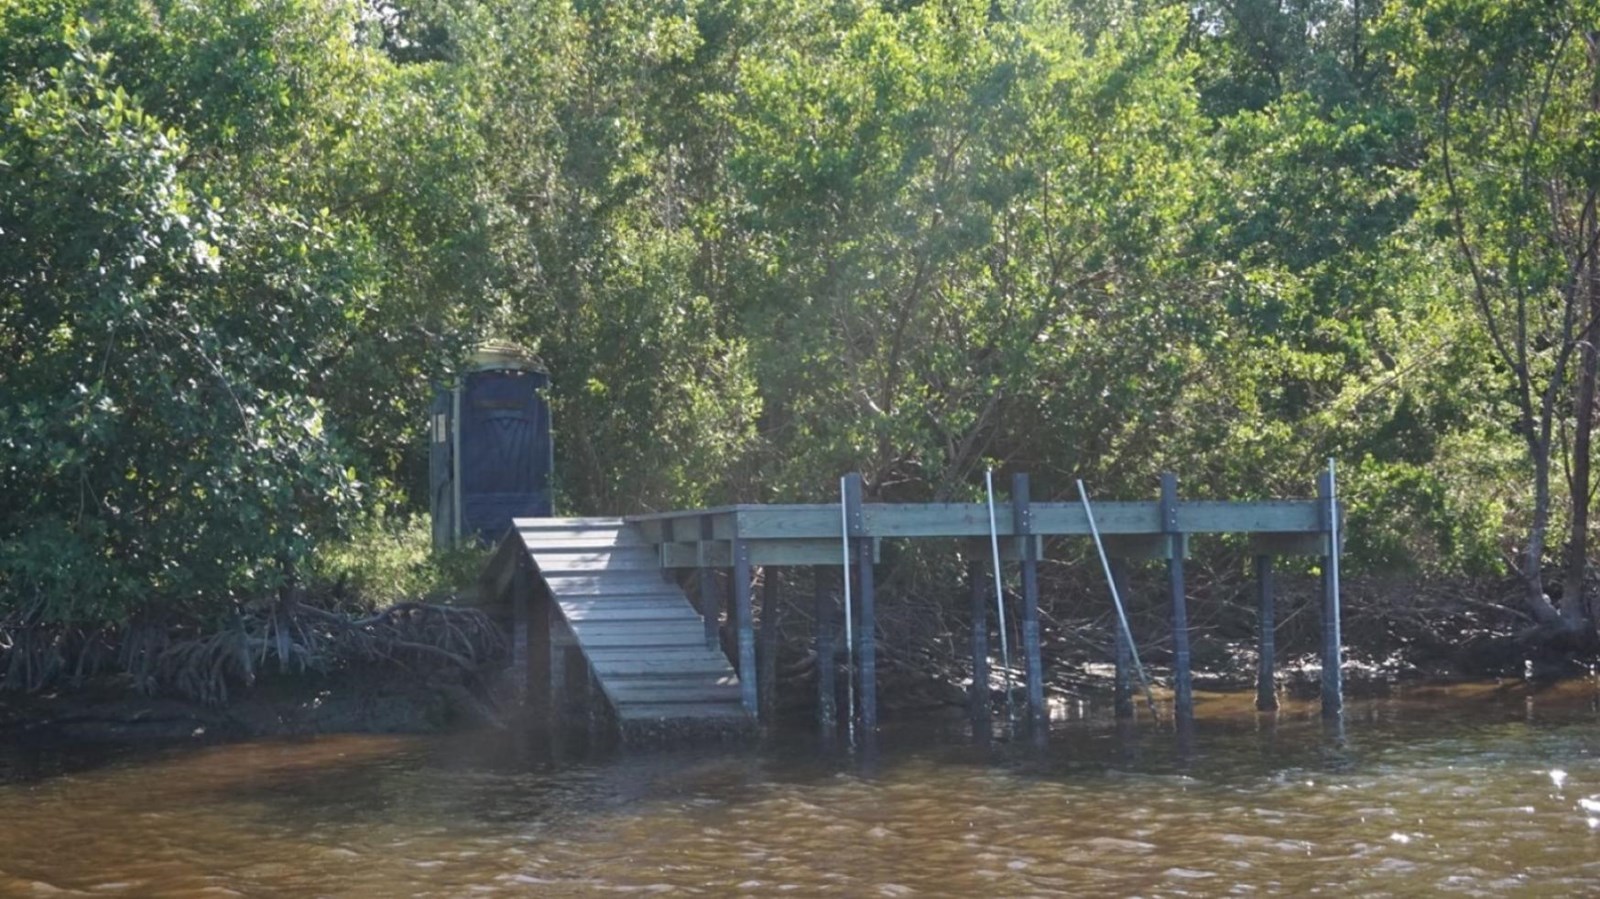 Murky brown water runs up against a mangrove shoreline, with a pitched dock and elevated platform